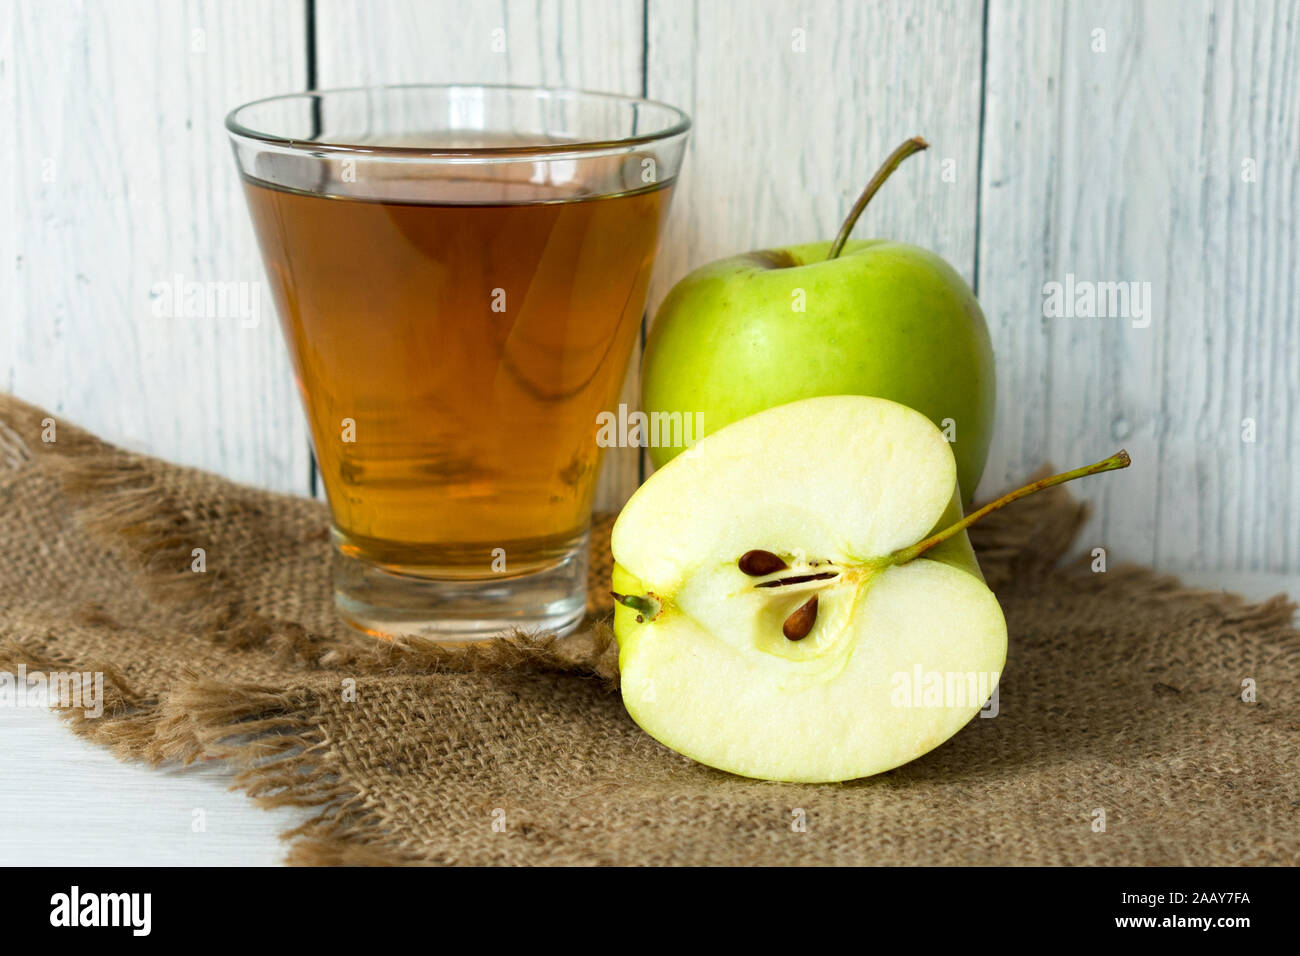 A glass of apple juice and a green apple on a white wooden background. Stock Photo